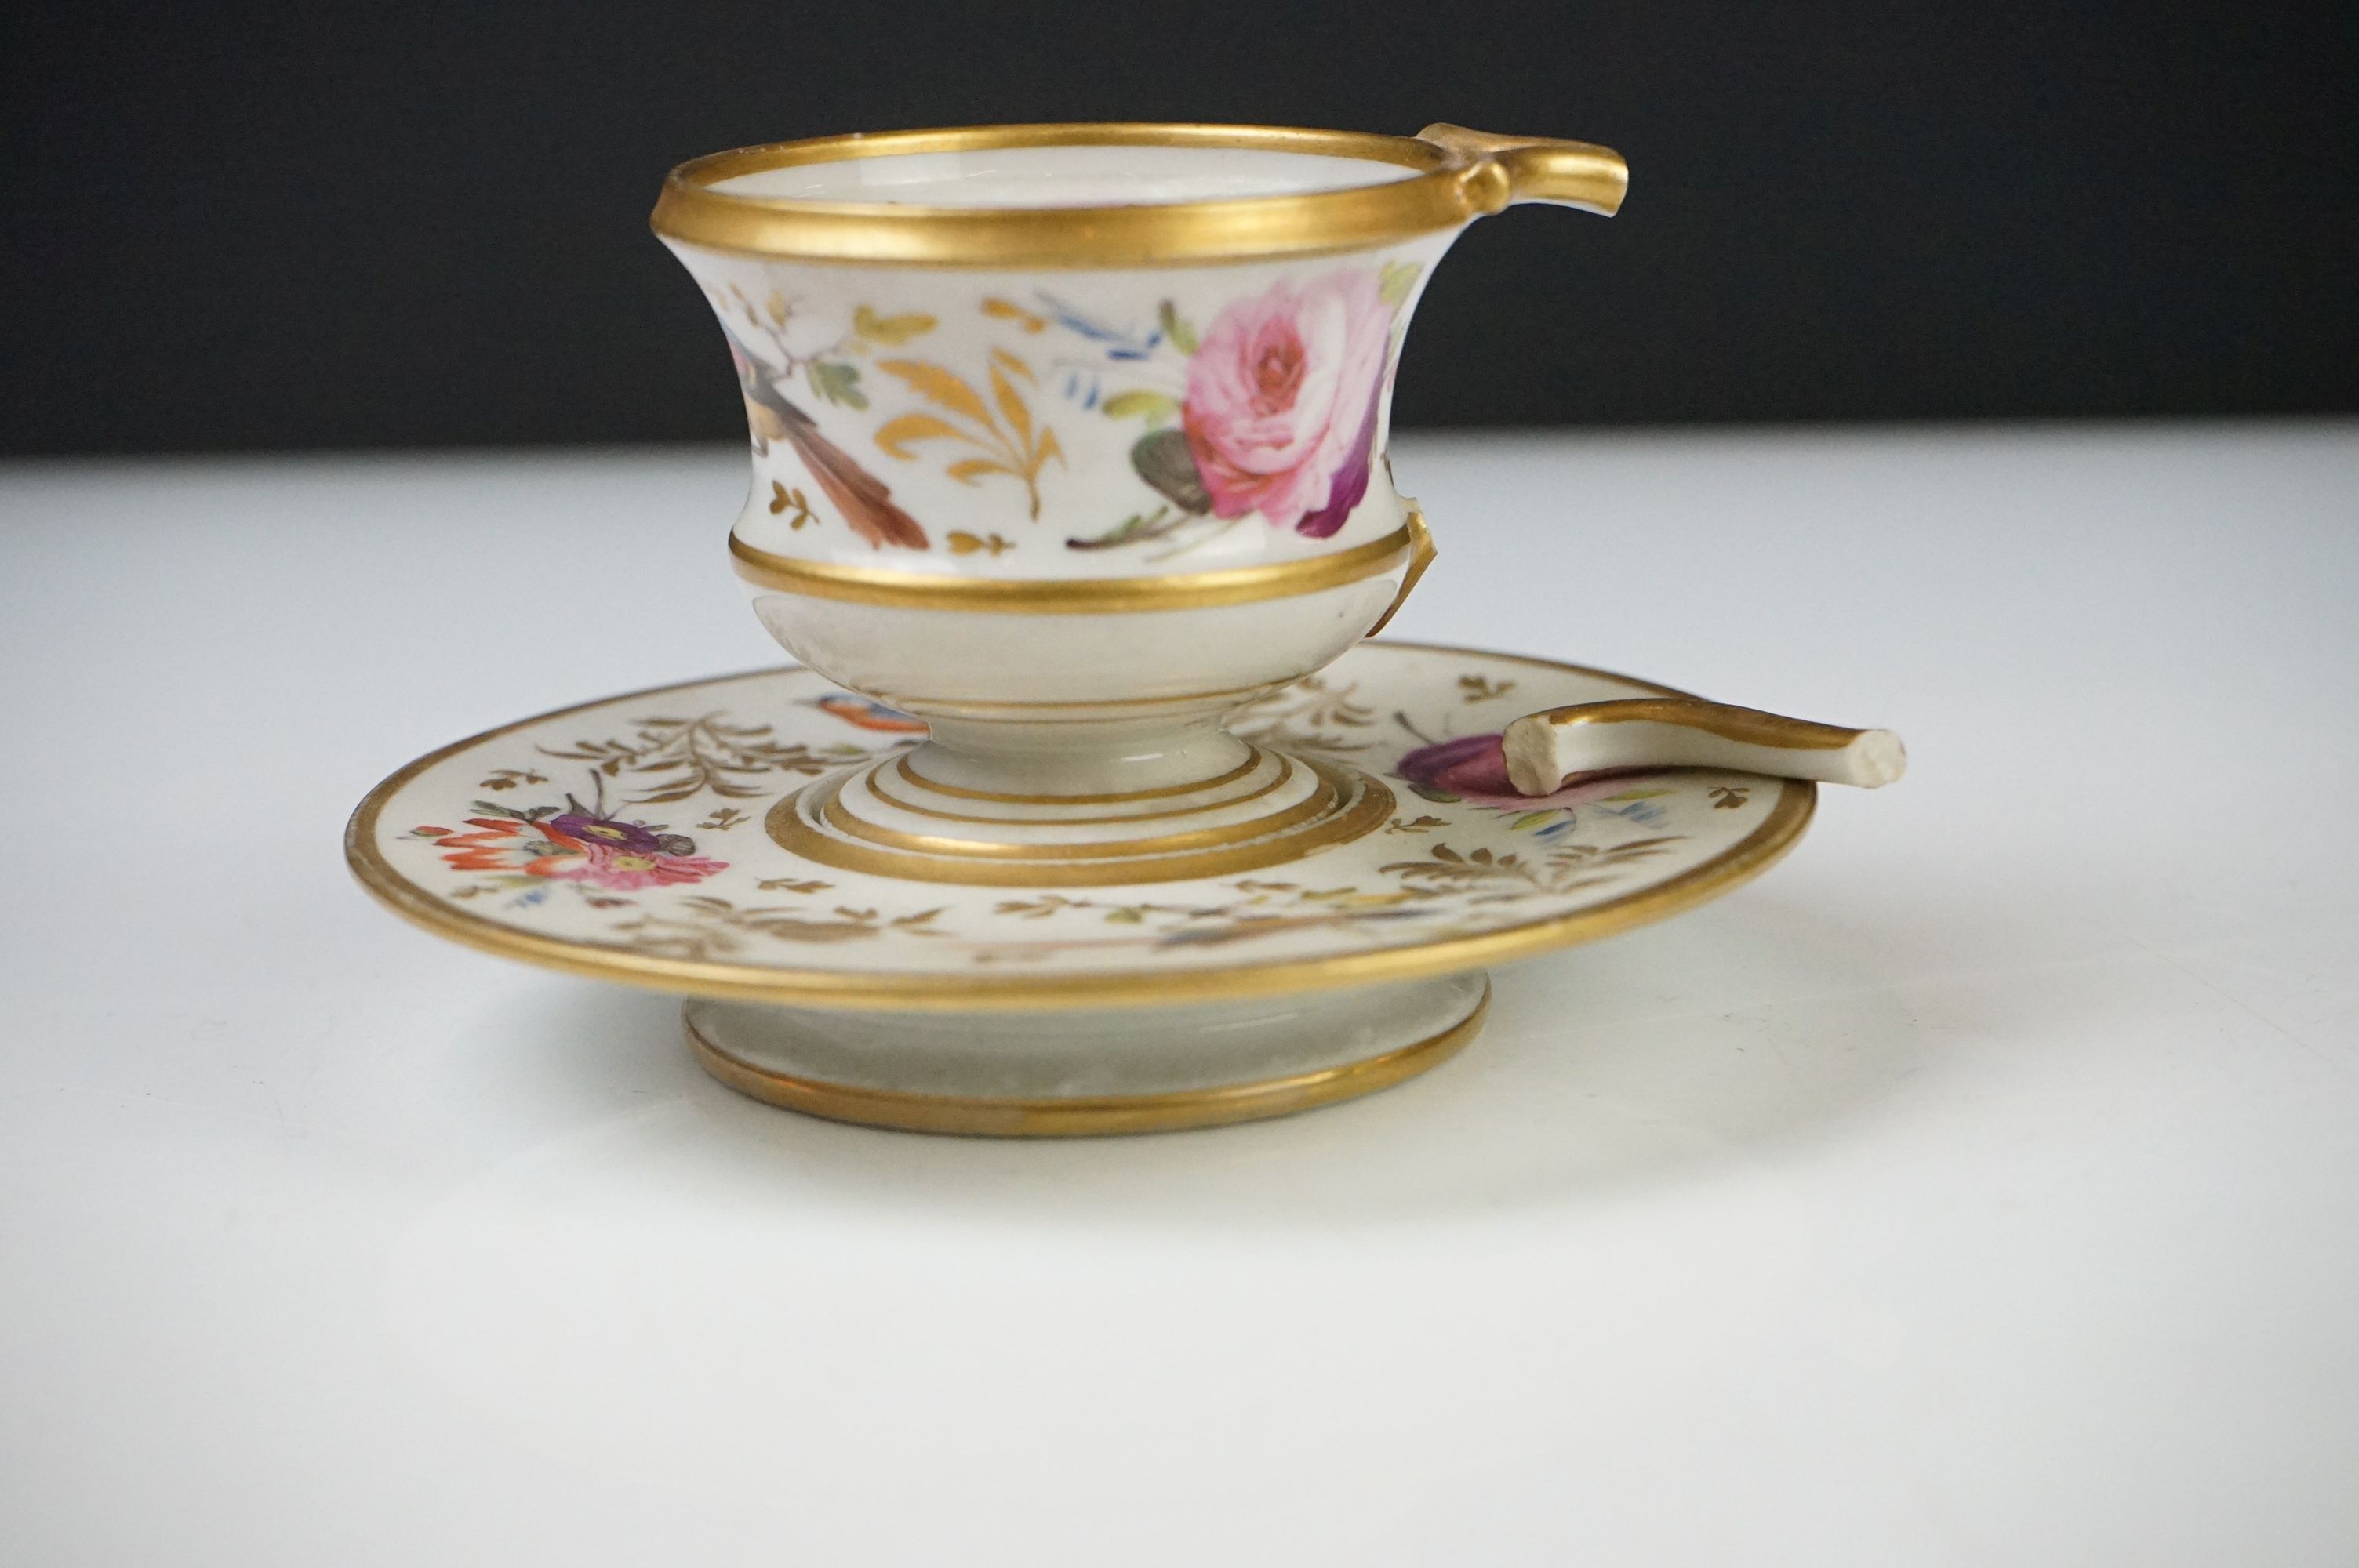 Pair of Continental Porcelain Cabinet Cups and Saucers decorated in gilt and enamels with flowers - Image 7 of 8